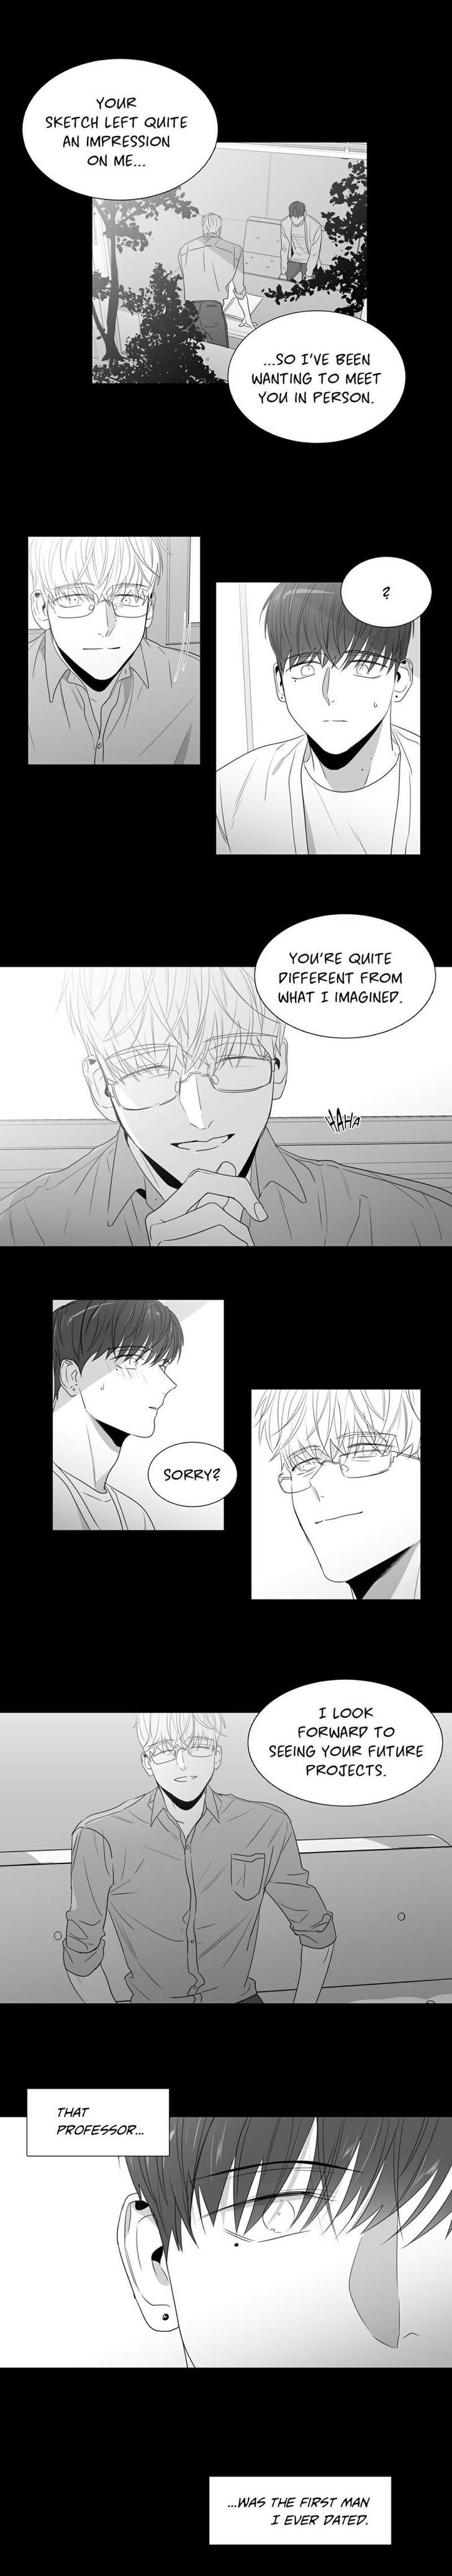 Lover Boy (Lezhin) Chapter 047.1 page 2